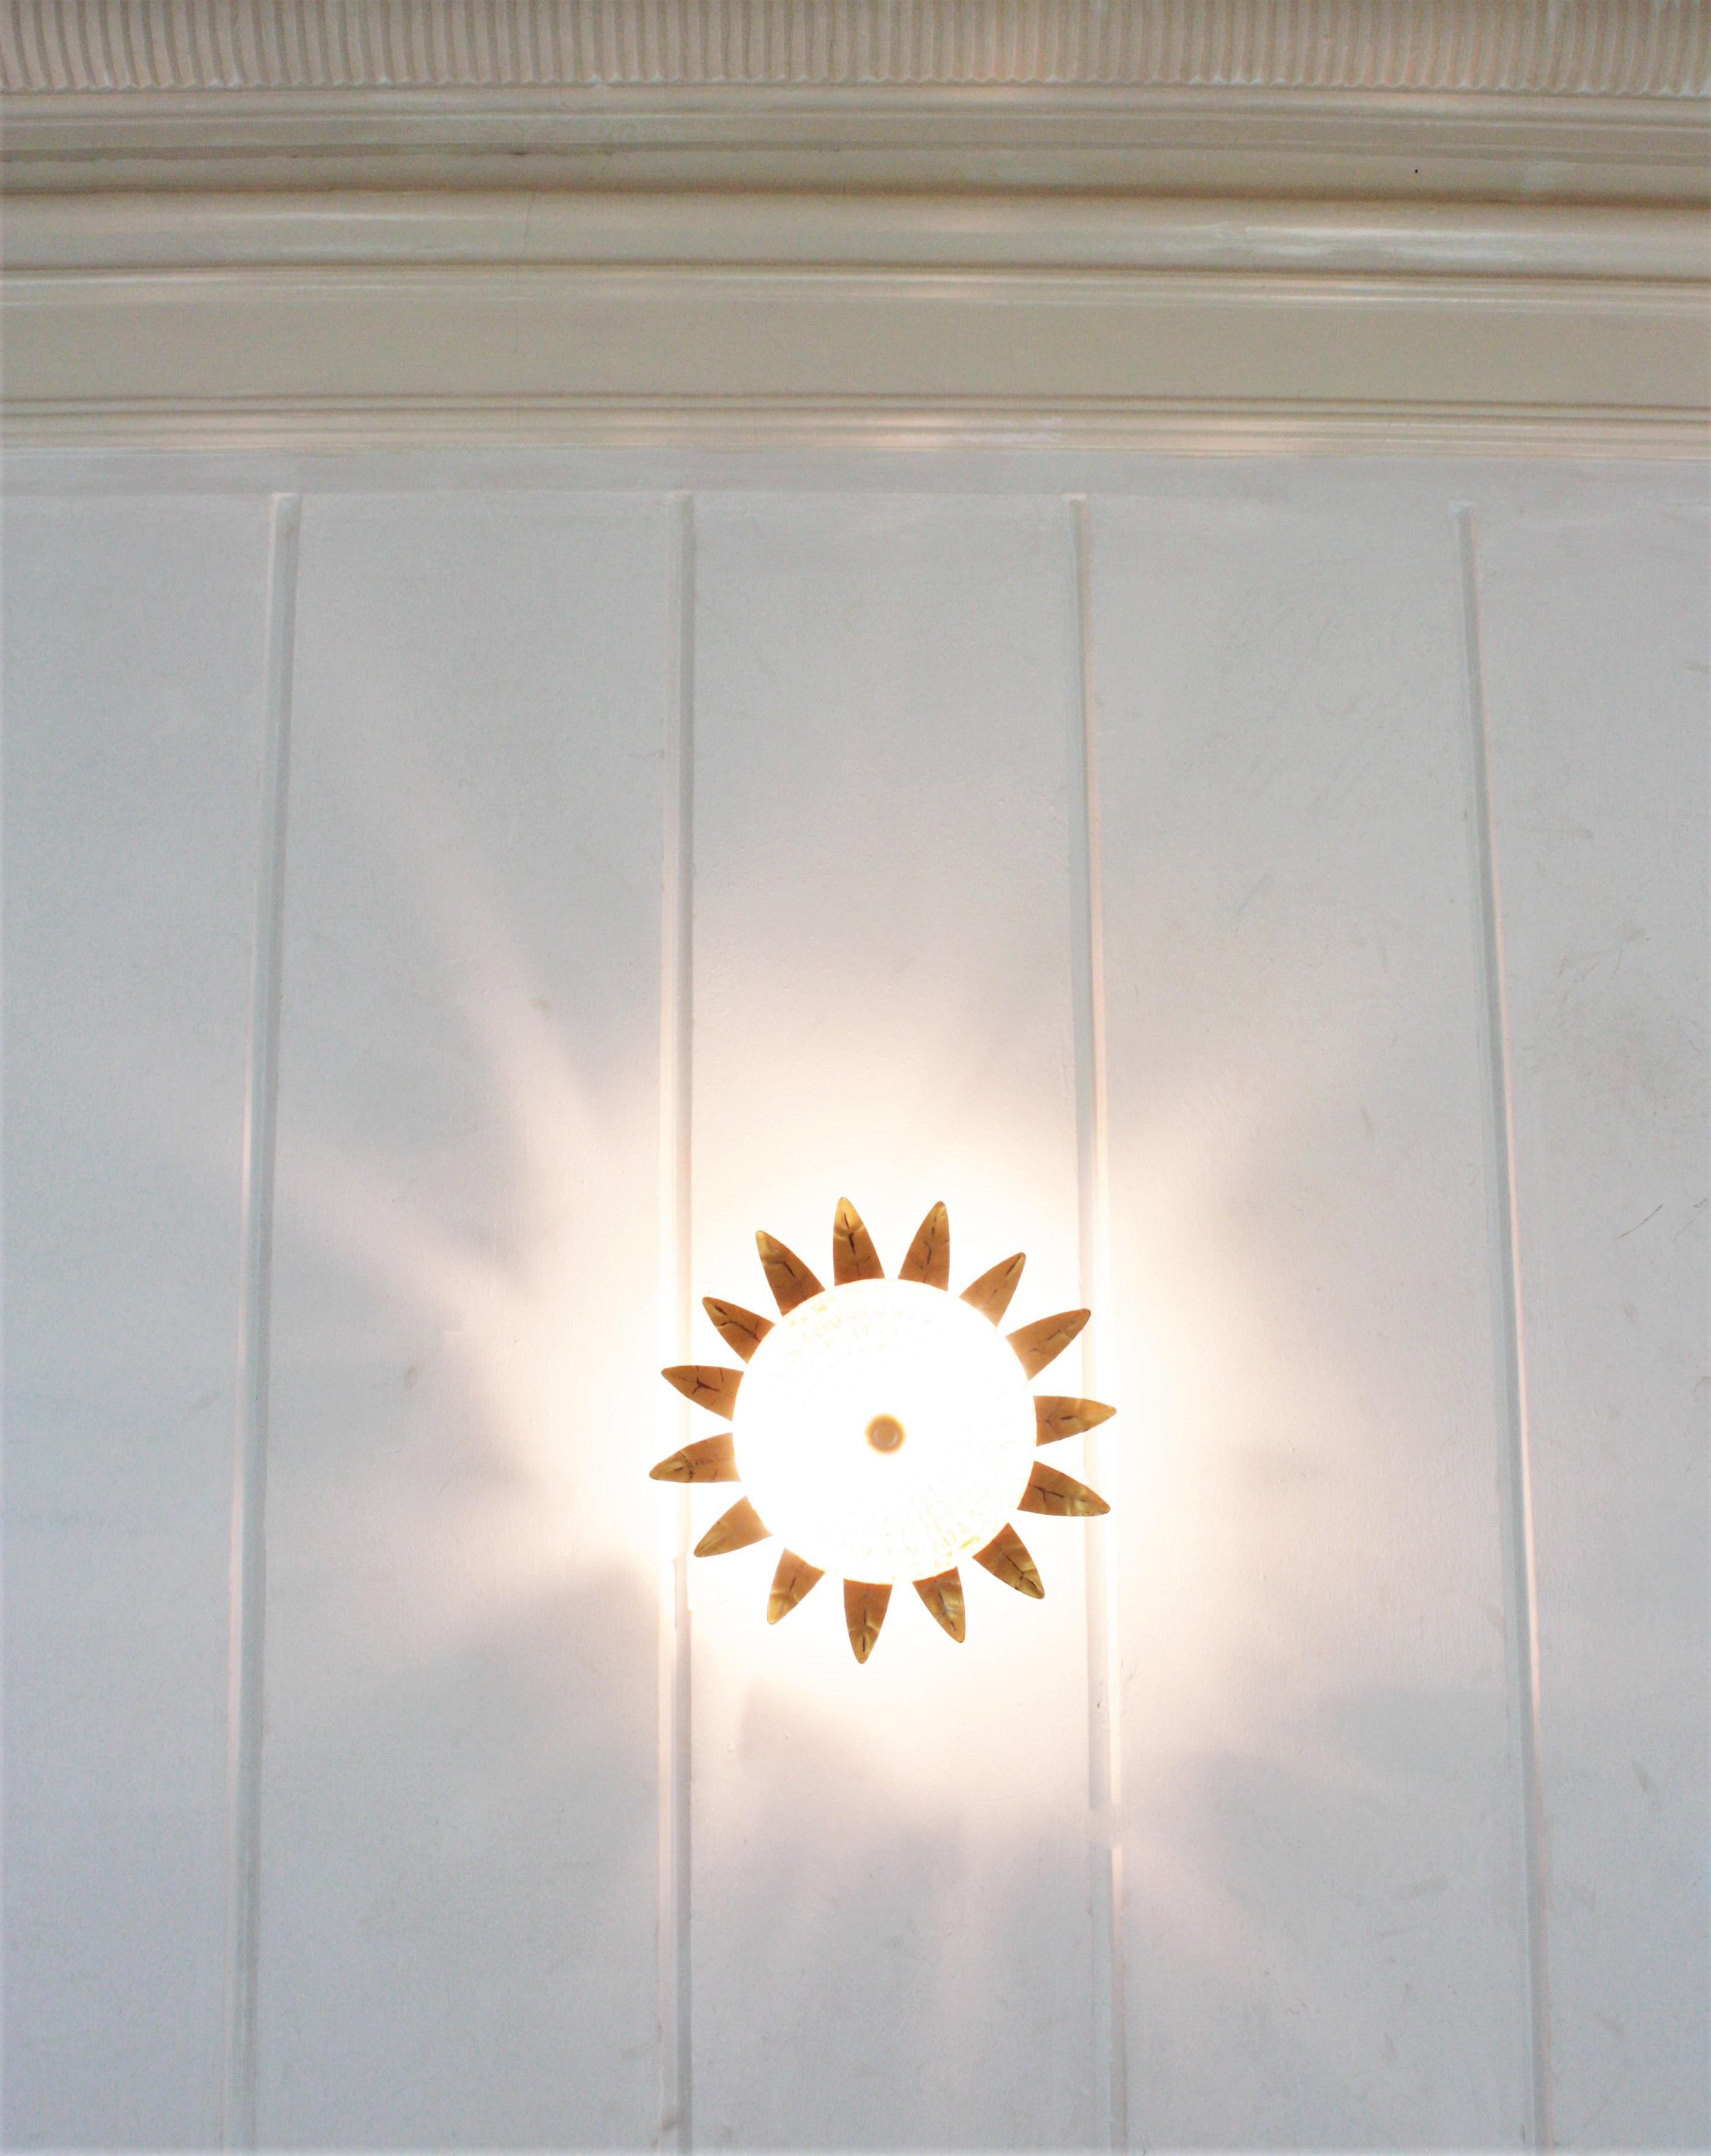 Sunburst Crown Light Fixture in Gilt Iron and Glass, 1950s For Sale 5